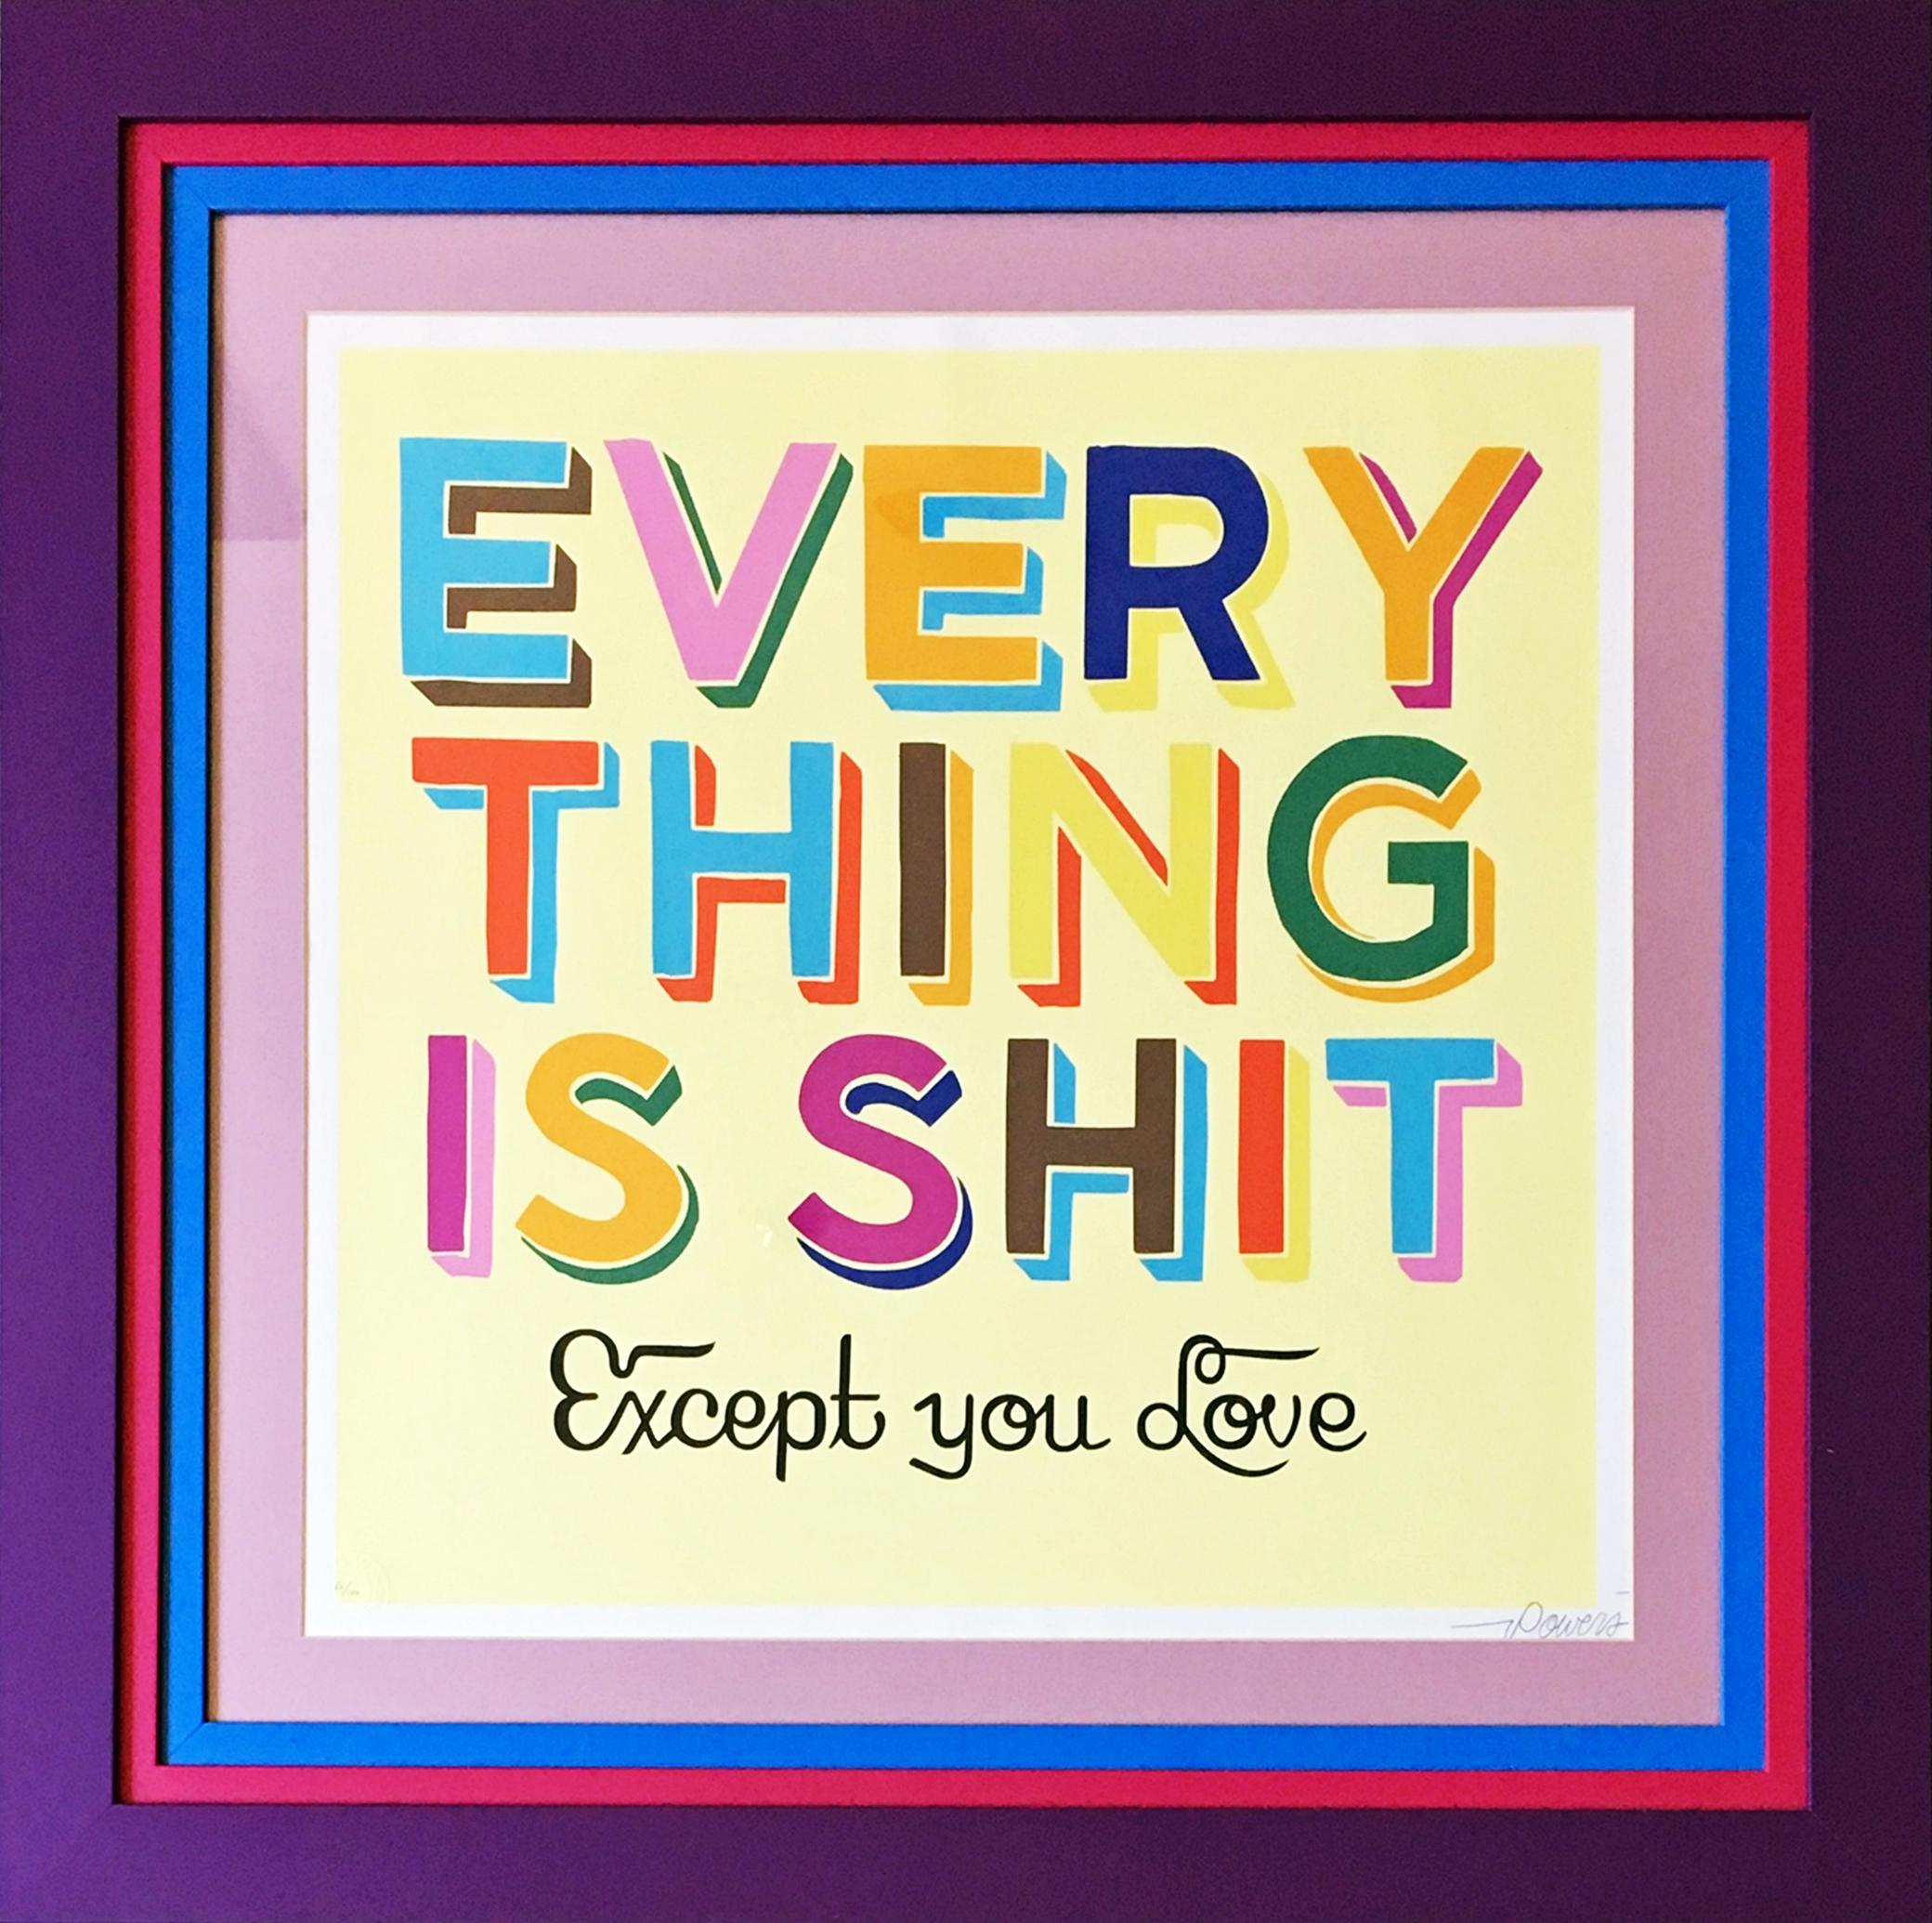 Stephen Powers Abstract Print - Everything is Shit Except You Love